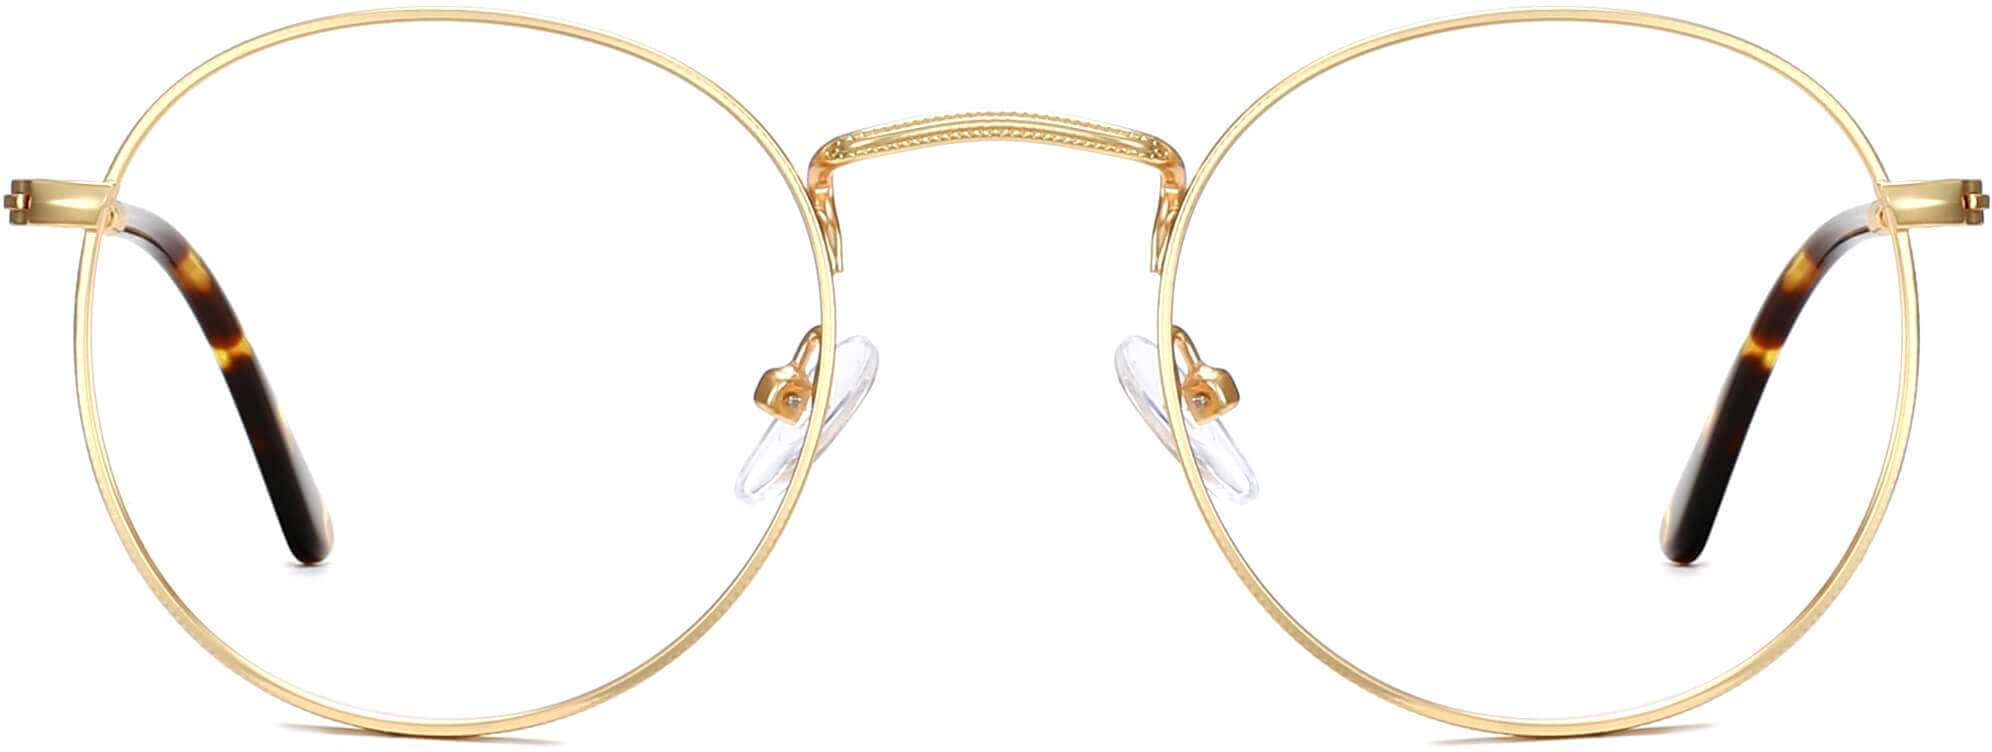 Dominic Round Gold Eyeglasses from ANRRI, front view